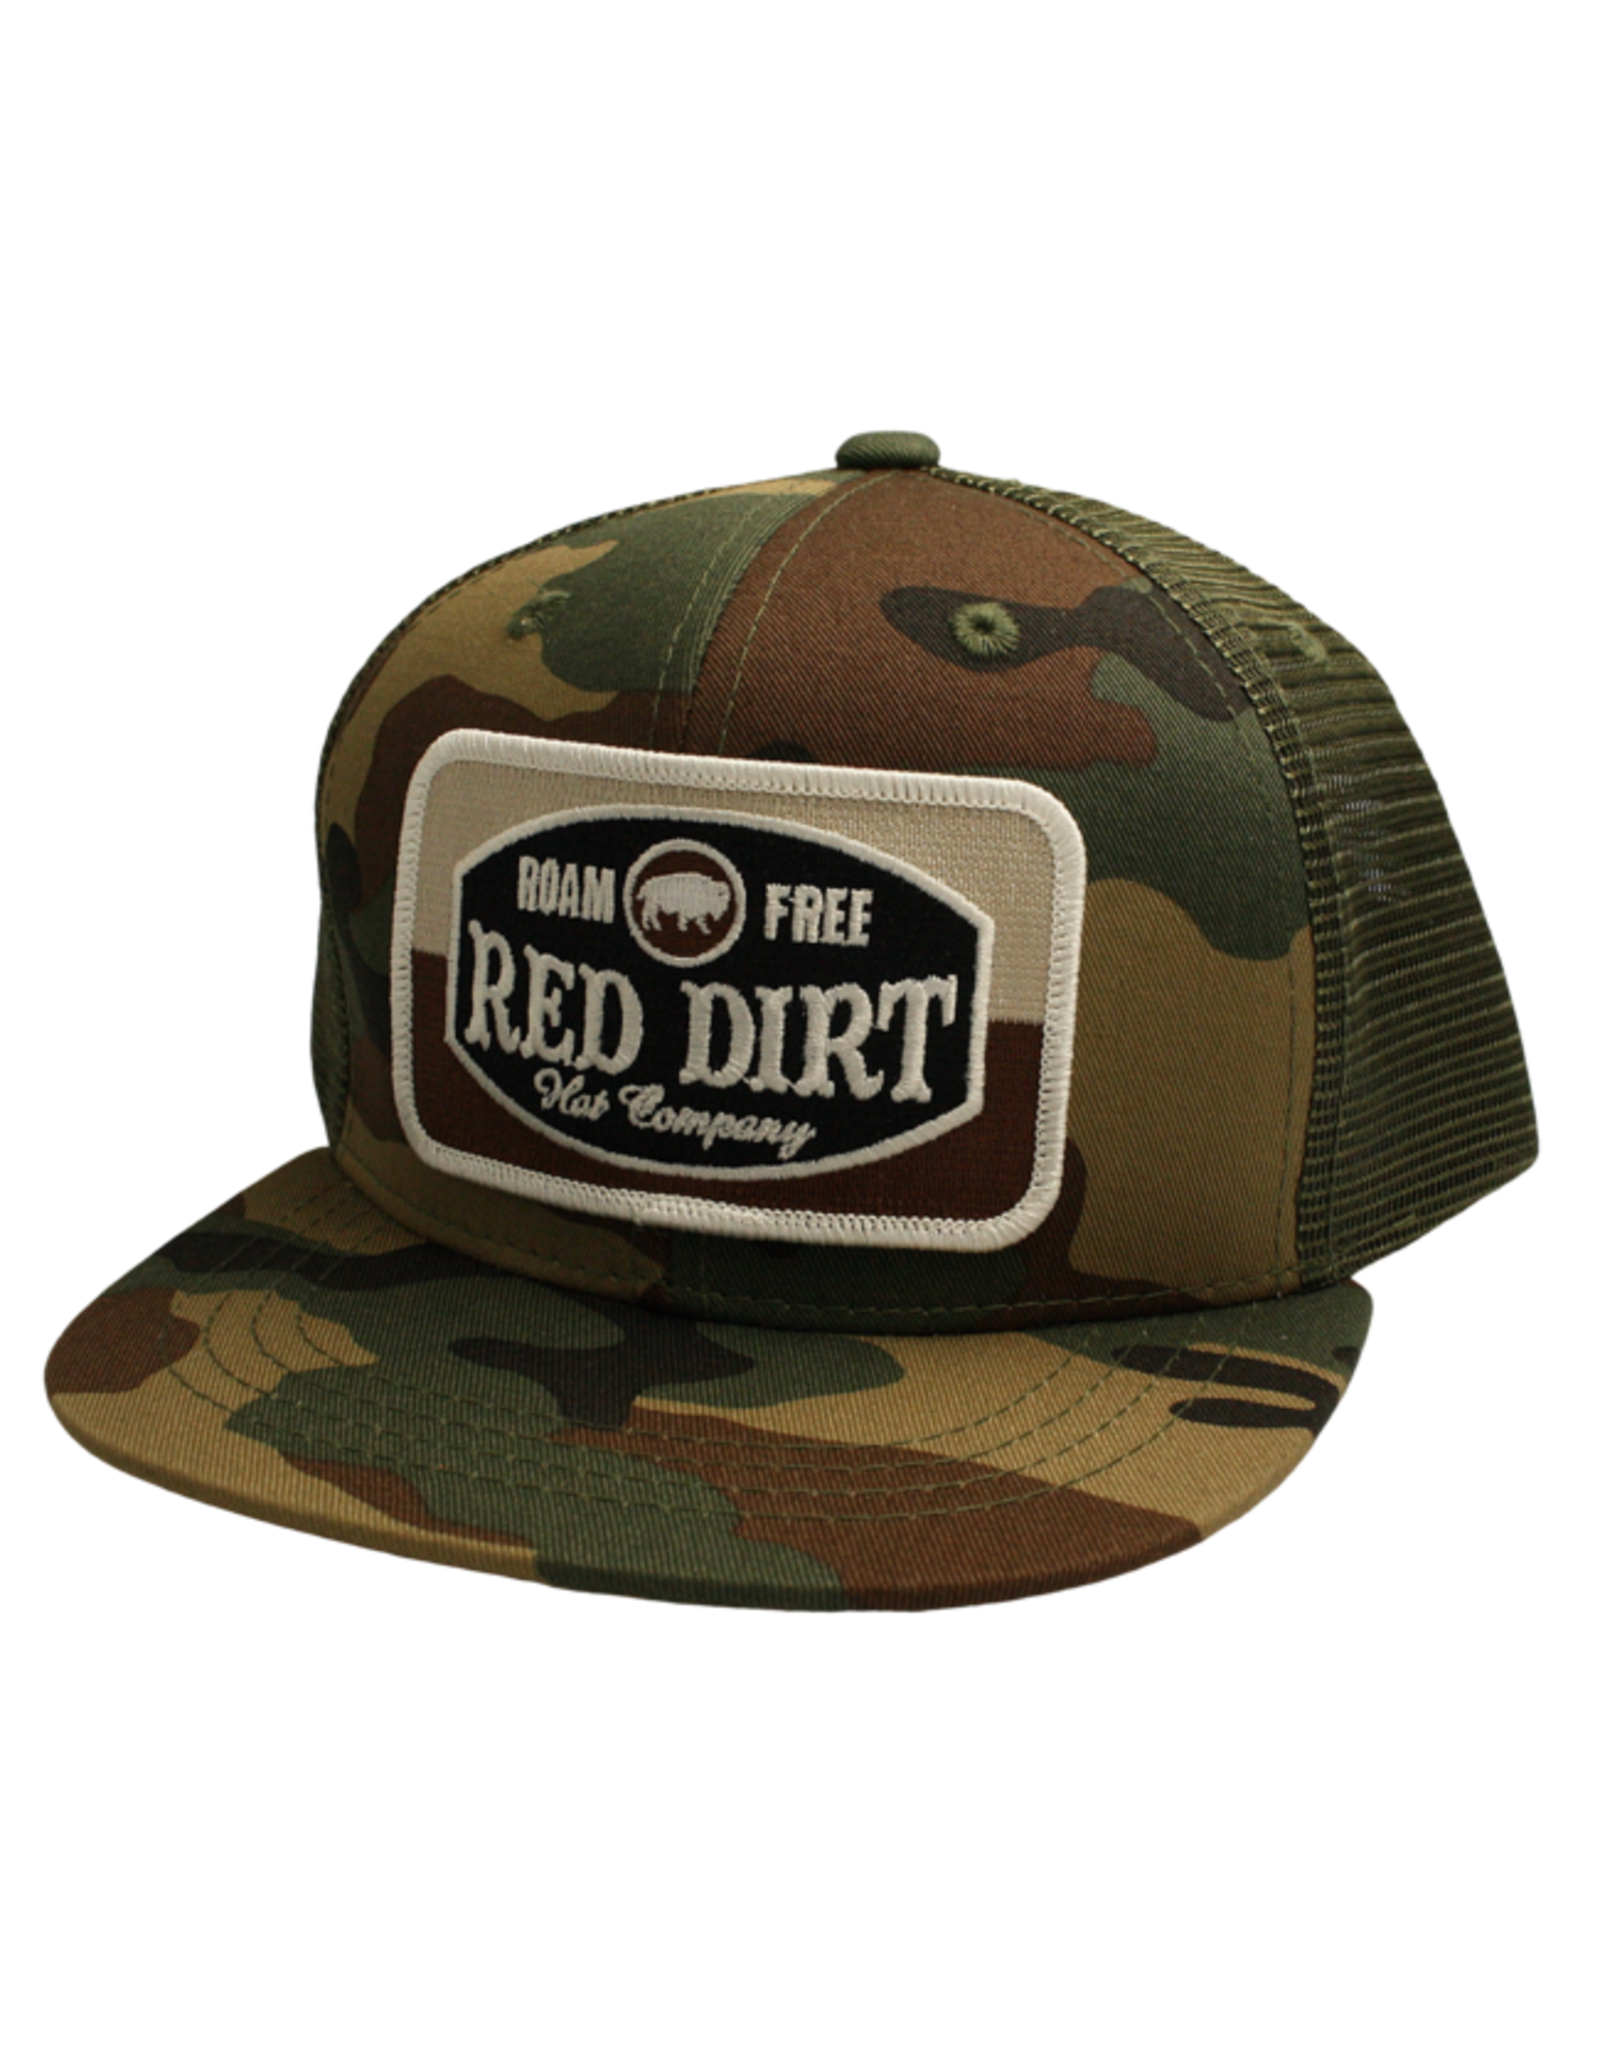 Red Dirt Hat Company Roam Free Camo/Army Green RDHCY15 Youth Snapback Cap